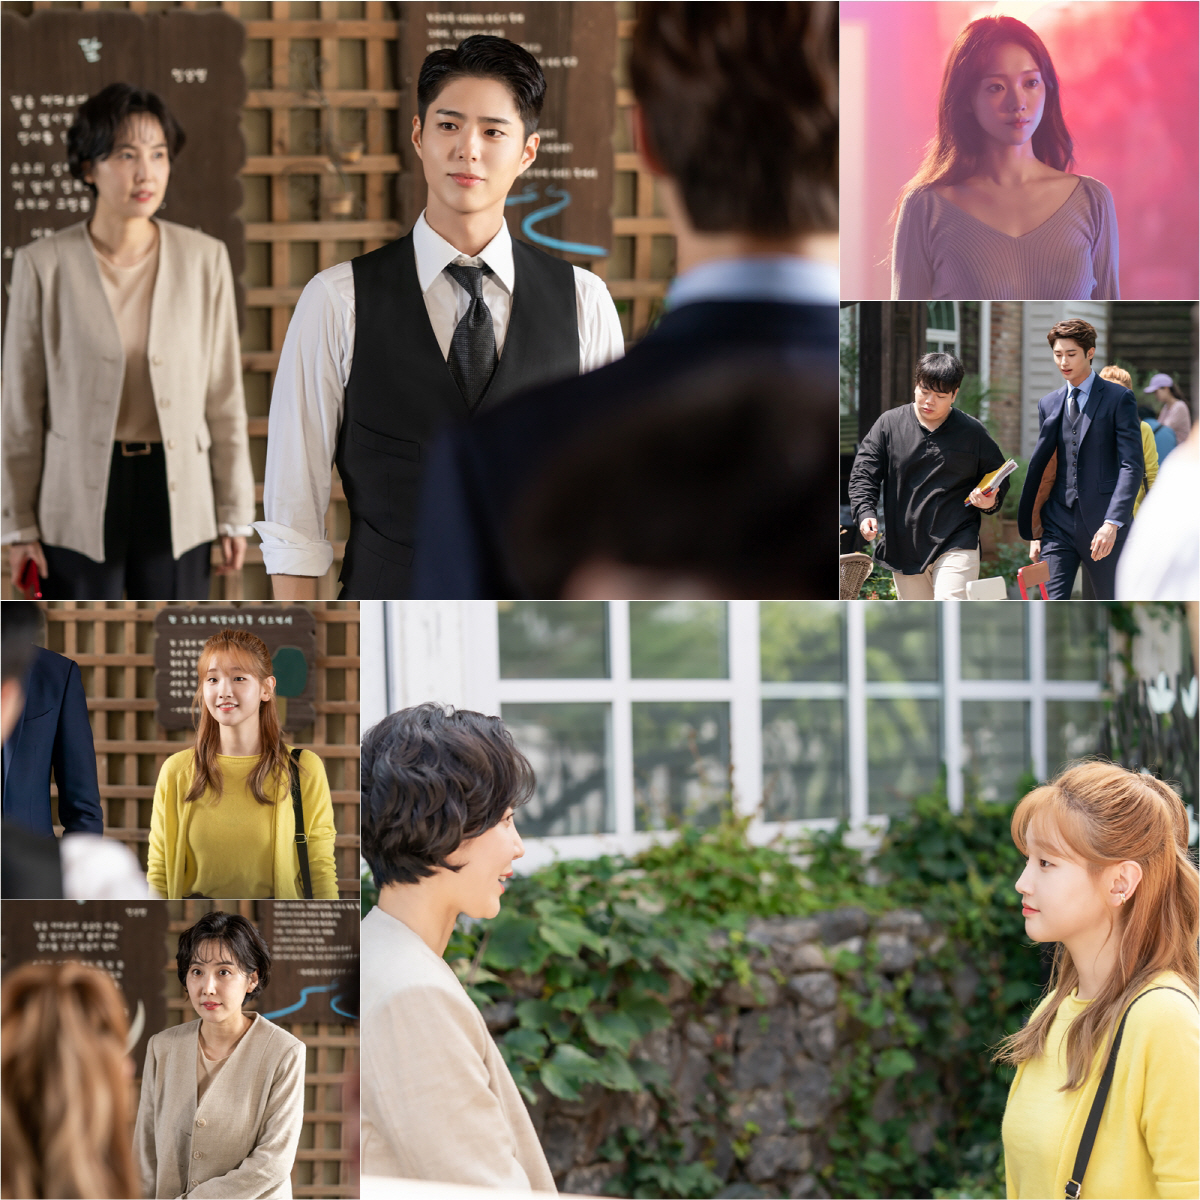 On 13 March, tvNs wall painting drama Youth Records (directed by An Gil-ho, playwright Ha Myung-hee, production fan entertainment, and Studio Dragon) unveiled the ten-day scene of Park Bo-gum, who was steadfast in the midst of a crisis.  Park So-dam, who escapes peoples eyes and shares his eye-catching appearance singing at the filming location of the drama The First Human, and the busy-moving Won Hae-hyo (Woo Woo-suk) are also captured and raised questions.  In addition, lee Sung-kyung, a former model colleague of Sahye-jun and a special appearance as Jin Seo-woo, the heroine of the new work, also raises expectations.The appearance of Sahye-jun, who had an unexpected ordeal in the last broadcast, was sad.  Sahye-jun continued his unstoppable Shusu move to be mentioned in the next installment of the worlds director, but he had to contend with timely malicious comments and rumors.  Speculation stories and broadcasts surrounding the death of Charlie Chung (Lee Seung-jun) are pouring out of control.Meanwhile, in the midst of the crisis, Sahye-jun was captured, unwaveringly appearing in new works.  Sahye-juns head-to-toe aura exudes the perfect actors aura.  Sahye-juns melodic eyes, which are exchanged with Park So-dam, avoid the eyes of the on-site staff, provoke Shim Kung.  The appearance of Won Hae-hyo, who was the star together, is also eye-catching.  She wants to make the runway of the shoot with a superior suit.  His struggles with severe growth are also focused on his progress.The serious face of manager Min-jae Lee (Shin Dong-mi) who summoned The Stable ha in the accompanying photo is also exciting.  It intrigues the Min-jae Lee who watched The Sahye-jun and Seung-has love affair with Seung-ha, and what he would say to Stabler.  The dreamy atmosphere of Jin Seo-woo (Lee Sung-kyung), a close friend and first human heroine since Sahye-jun and the models days, is also interesting.  Lee Sung-kyungs special appearance spurs expectations.In the 12th episode, which airs today (13Th), Sahye-jun is depicted in another crisis.  A dangerous signal will be detected in the romance between Sahye-jun and Sahye-jun, who have vowed steadfast love.  The production team of Youth Records said, We look forward to the success of Lee Sung-kyung, who appears as jin Seo-woo, an actress who is the catalyst for emotional agitation, and also has a change of emotion steadily, even in the ongoing crisis.Meanwhile, the 12th episode of TVNs Youth Records airs today (13th) at 9 p.m.